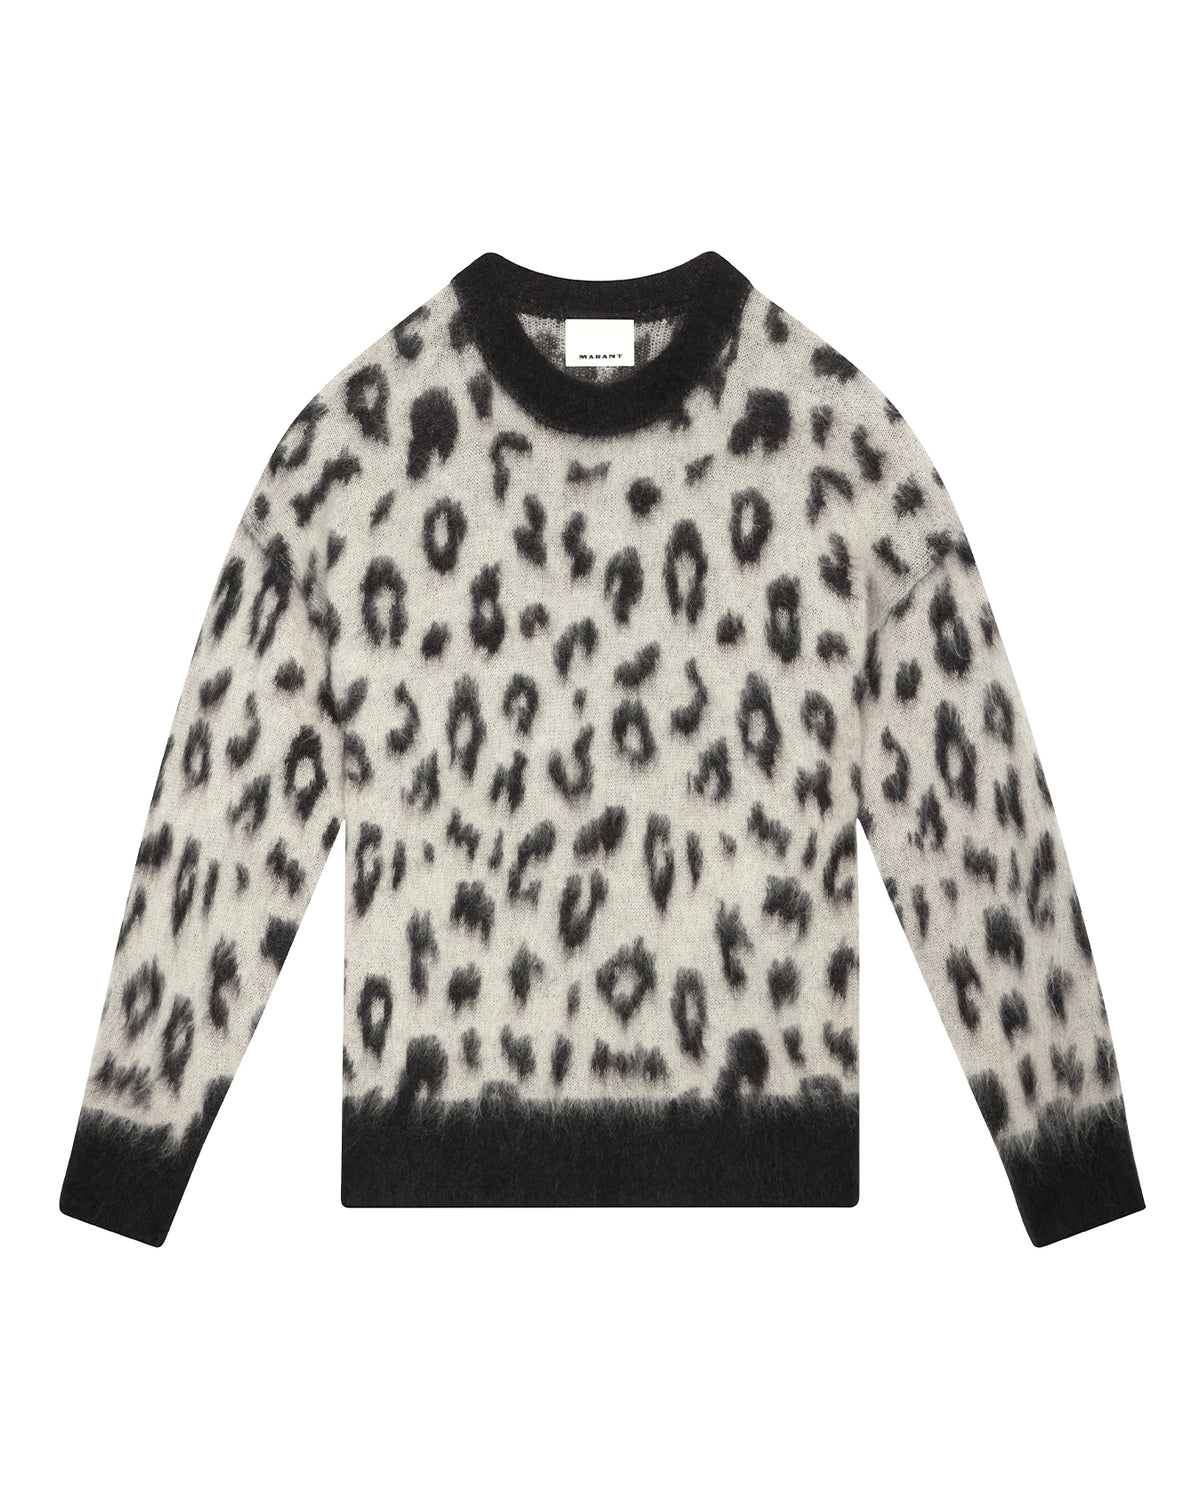 Tevy Wild Brushed Mohair Crew Sweater - Black